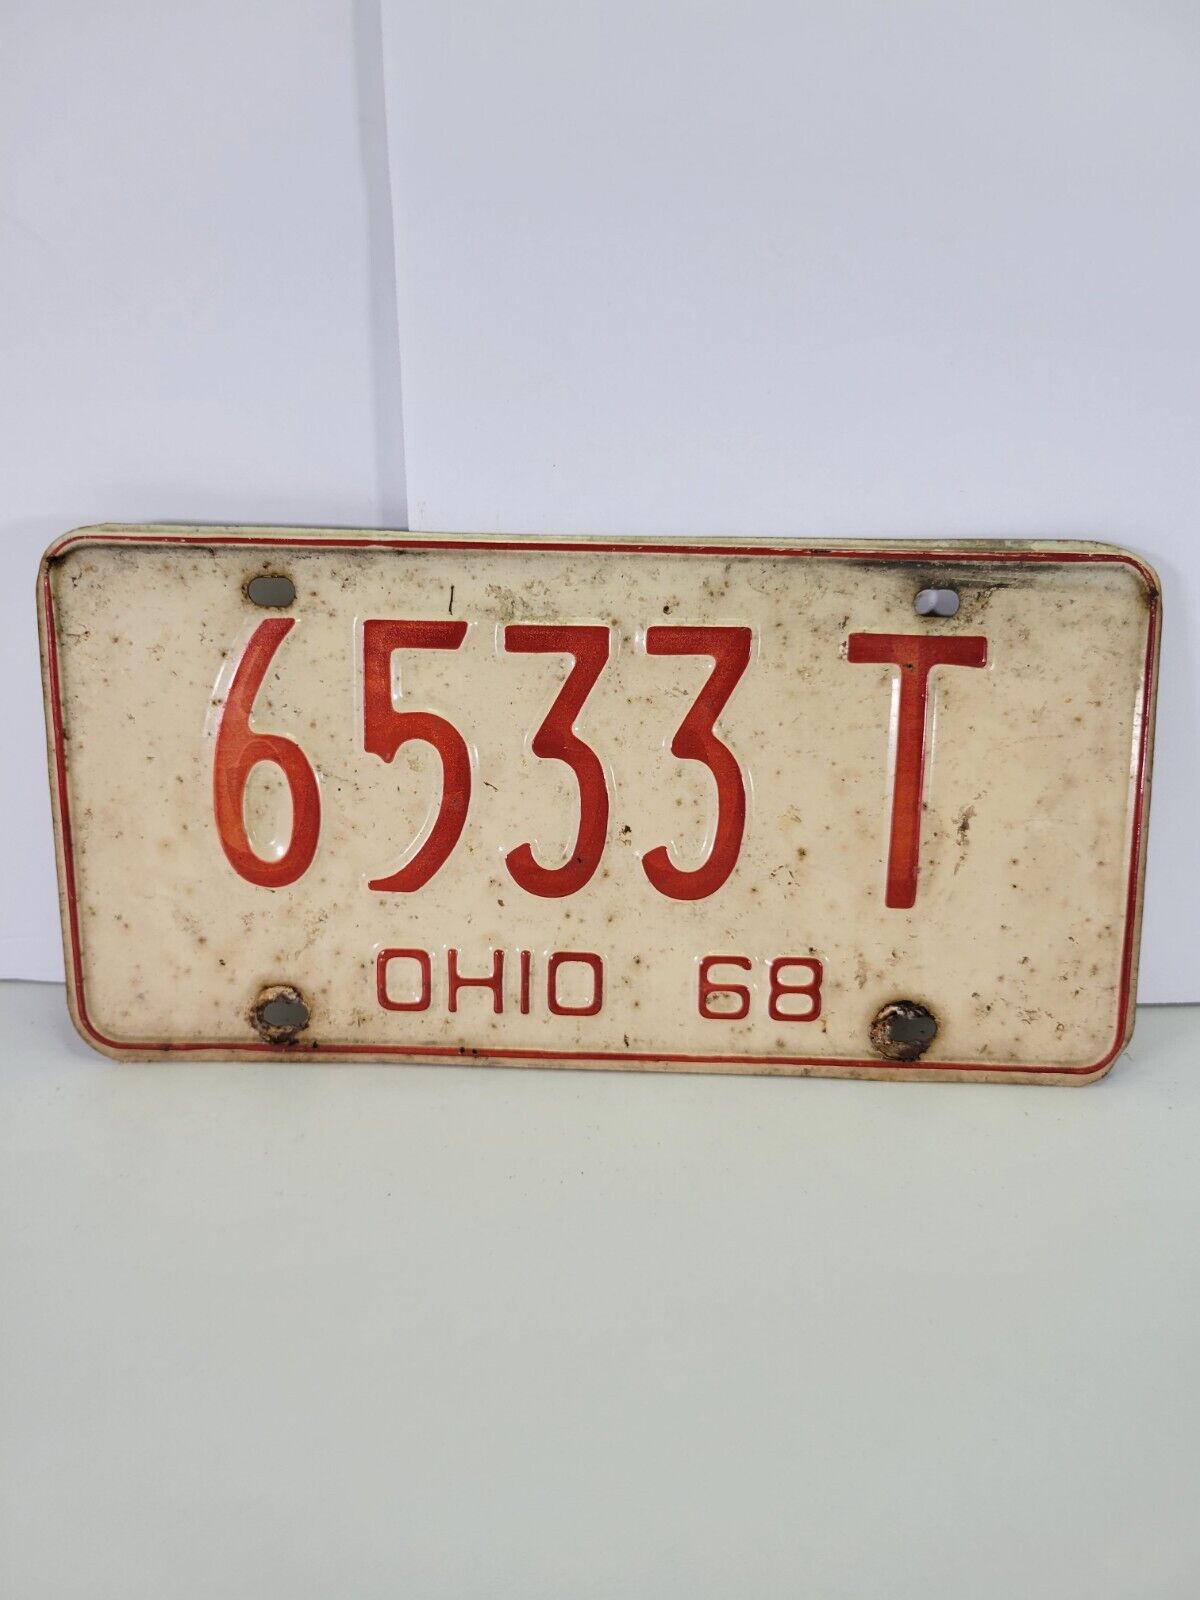 Vintage 1968 Ohio License Plate Red Lettering White Background 6533 T